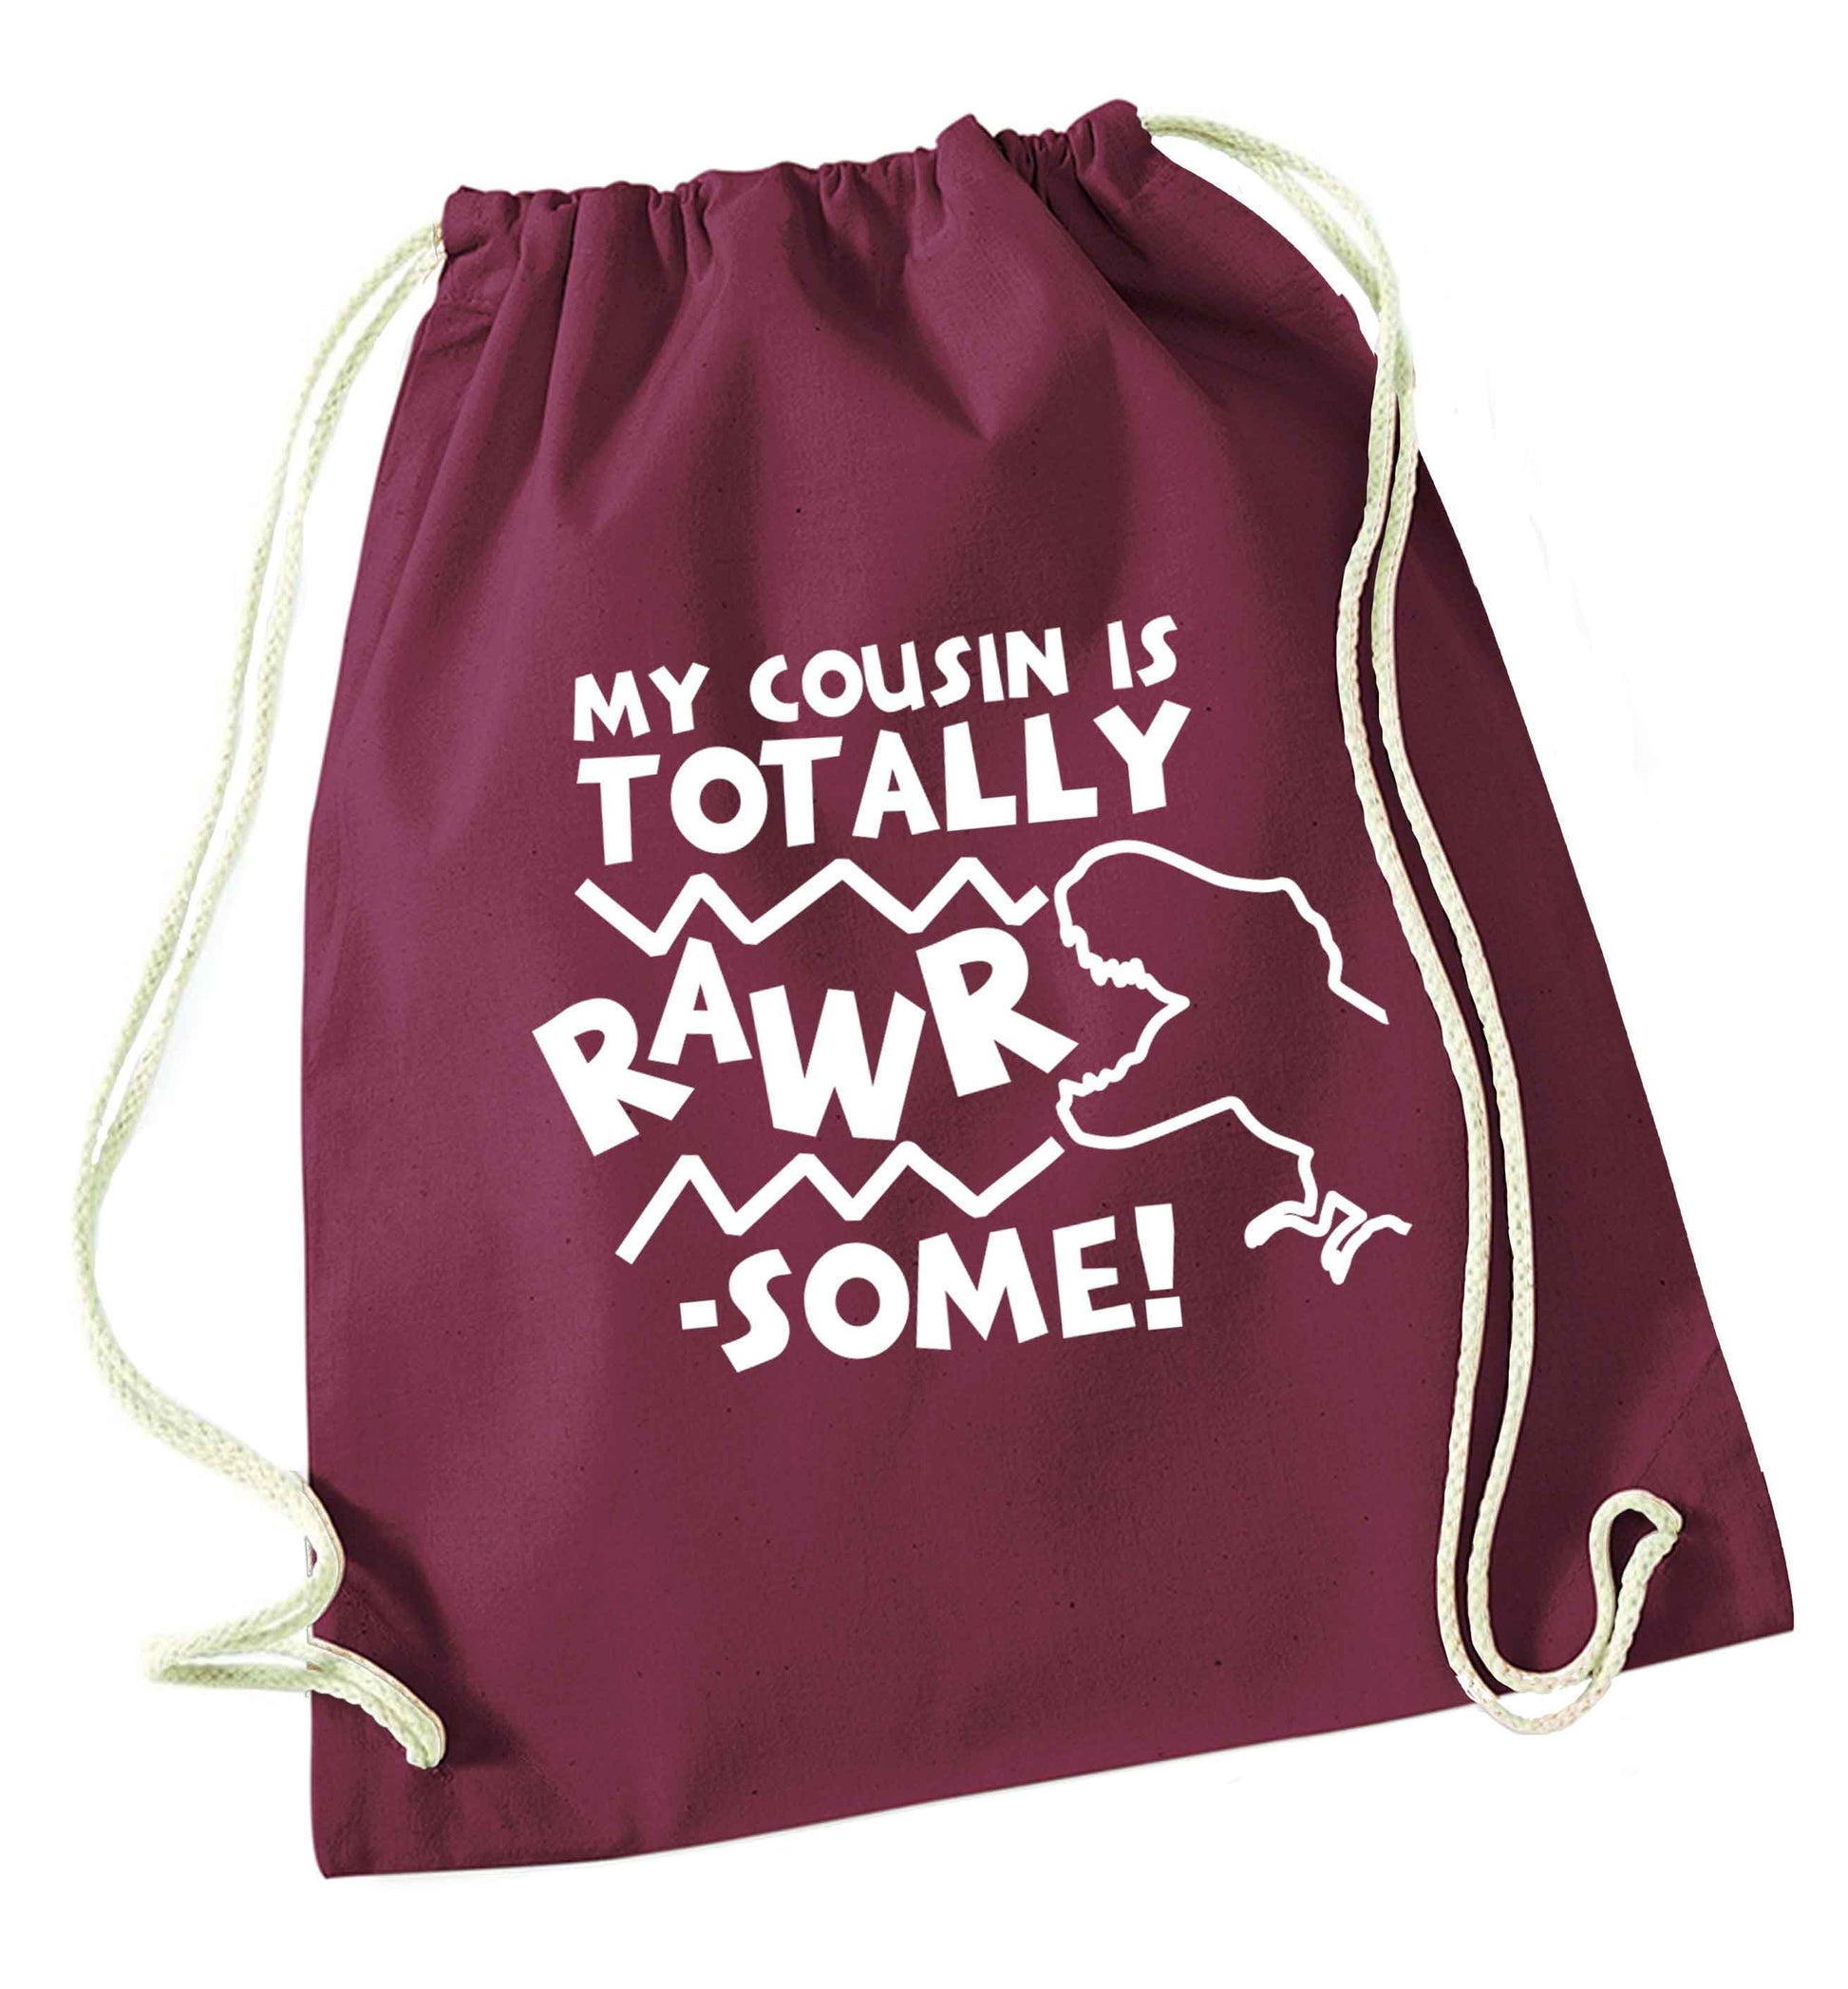 My cousin is totally rawrsome maroon drawstring bag